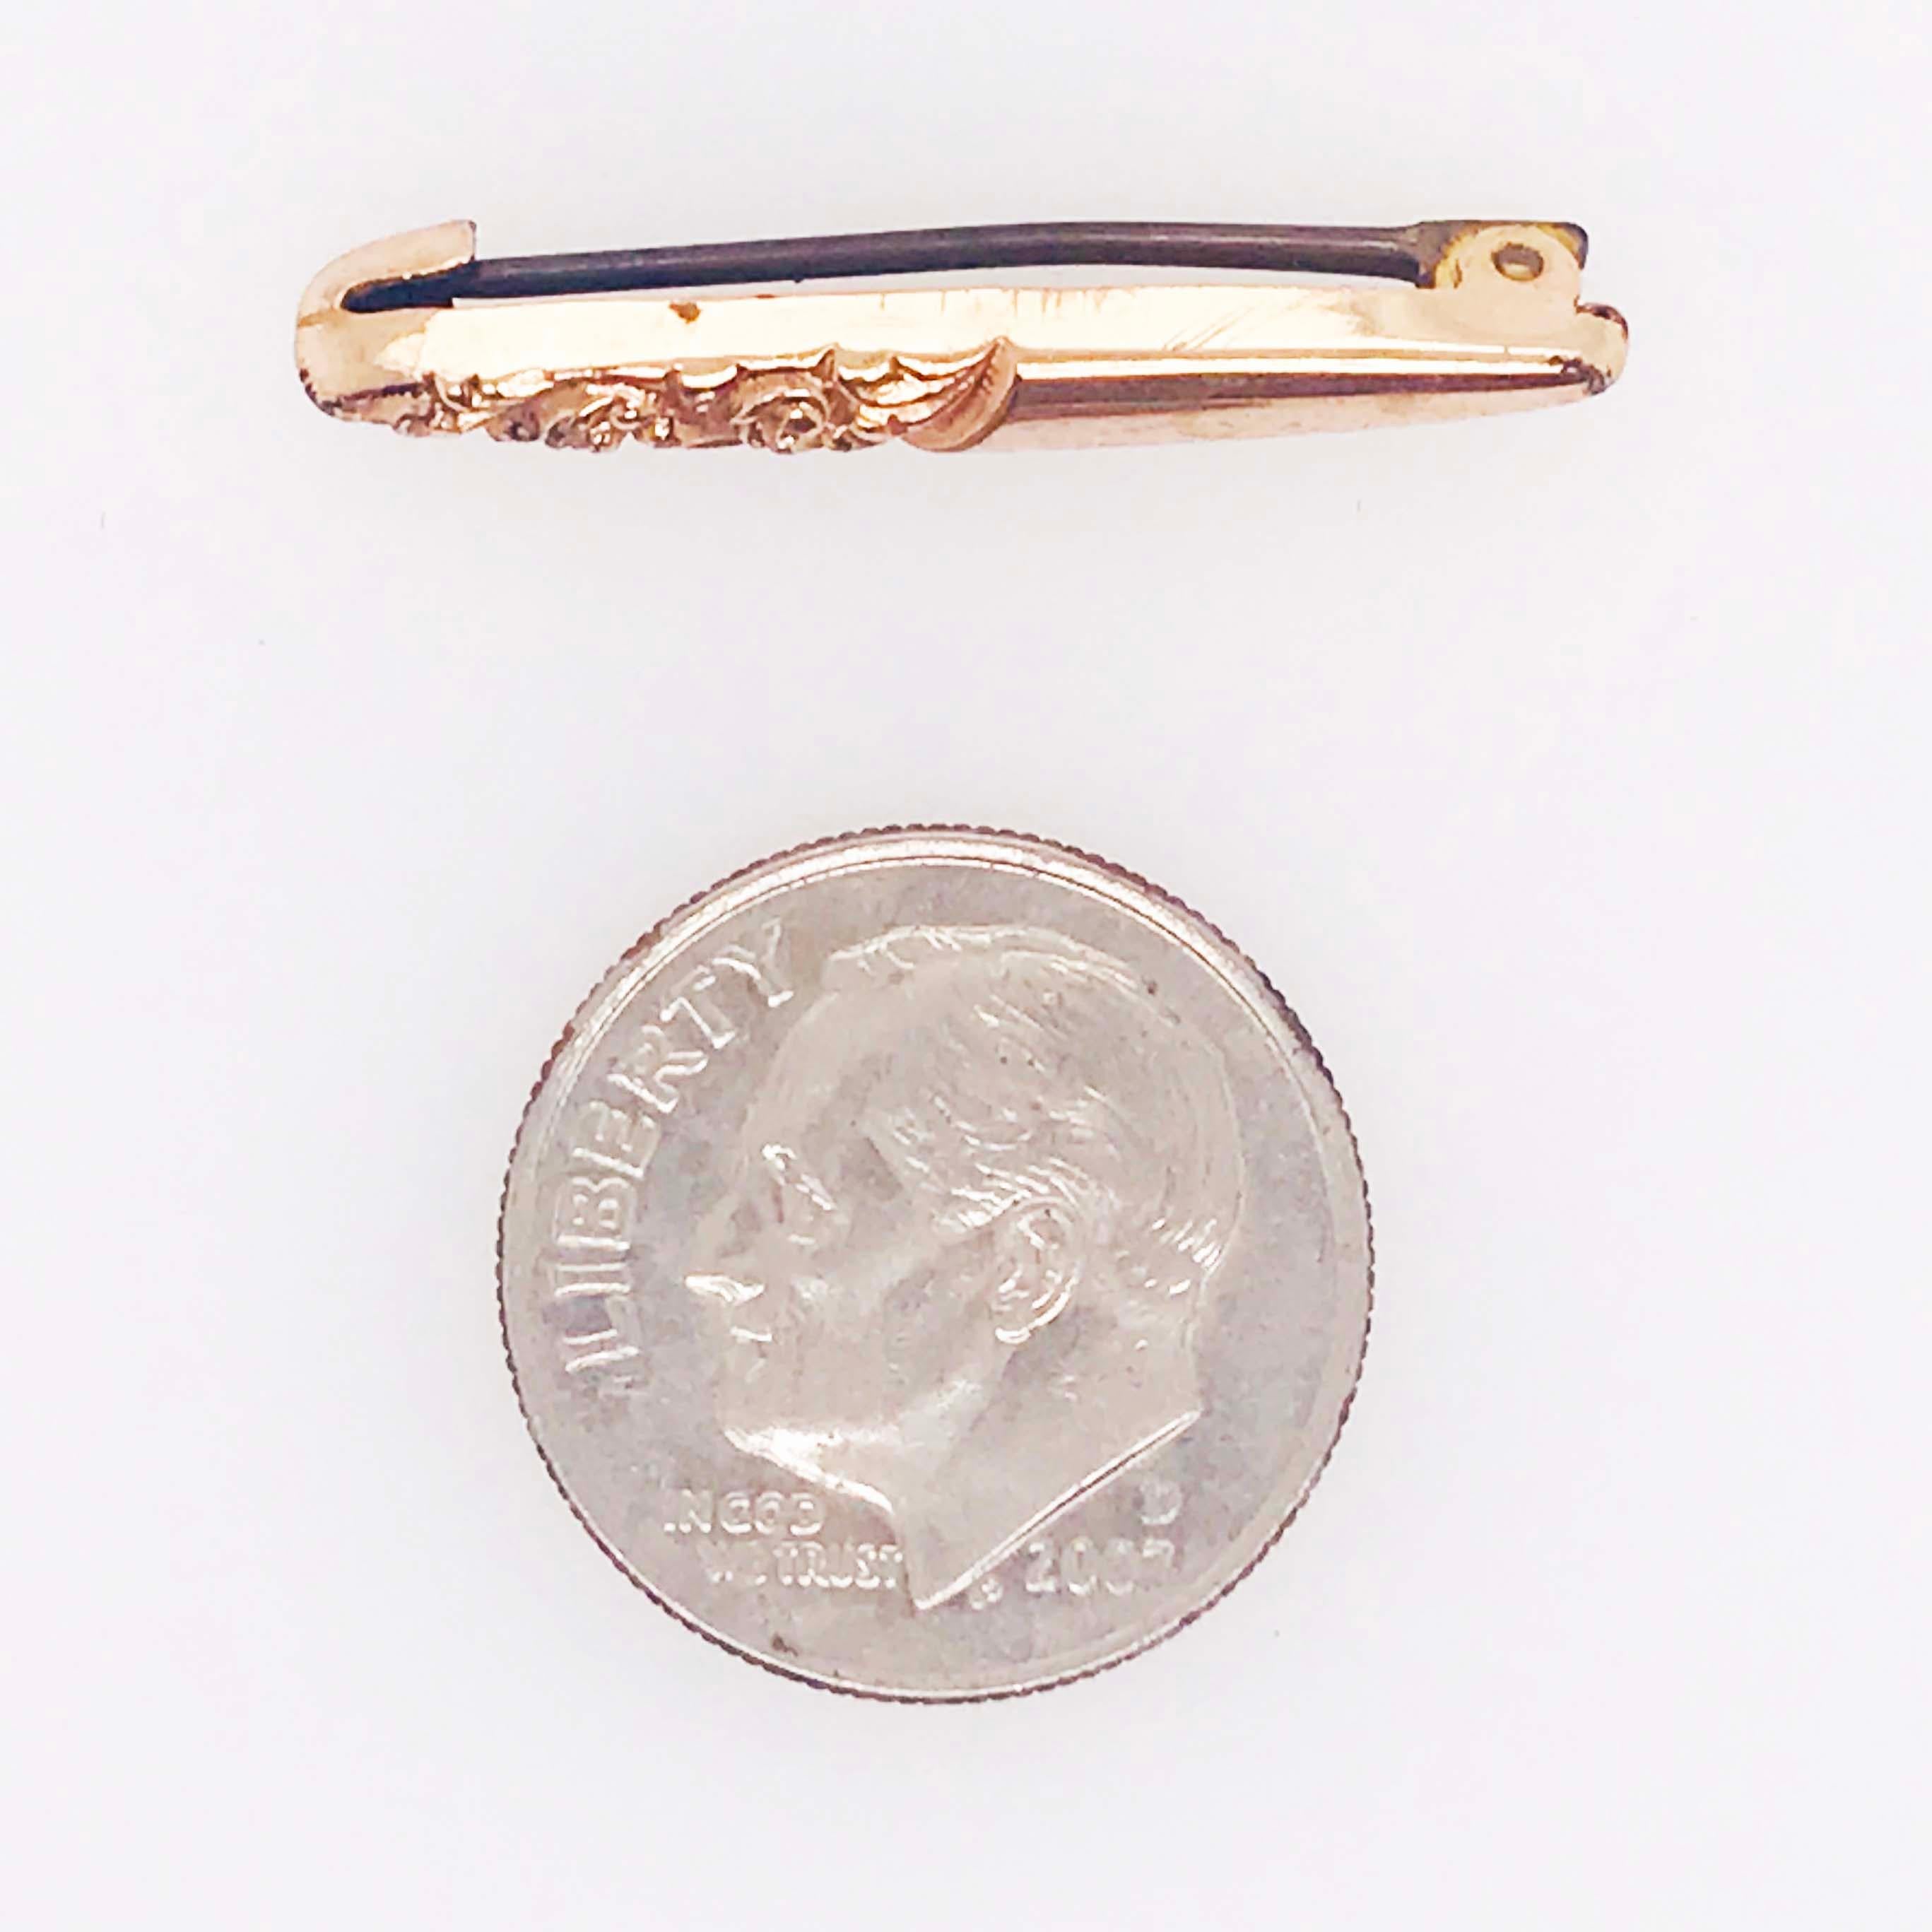 Rose Scroll Pin, Scroll, Rose Gold Brooch with Hand Engraving, circa 1910 2